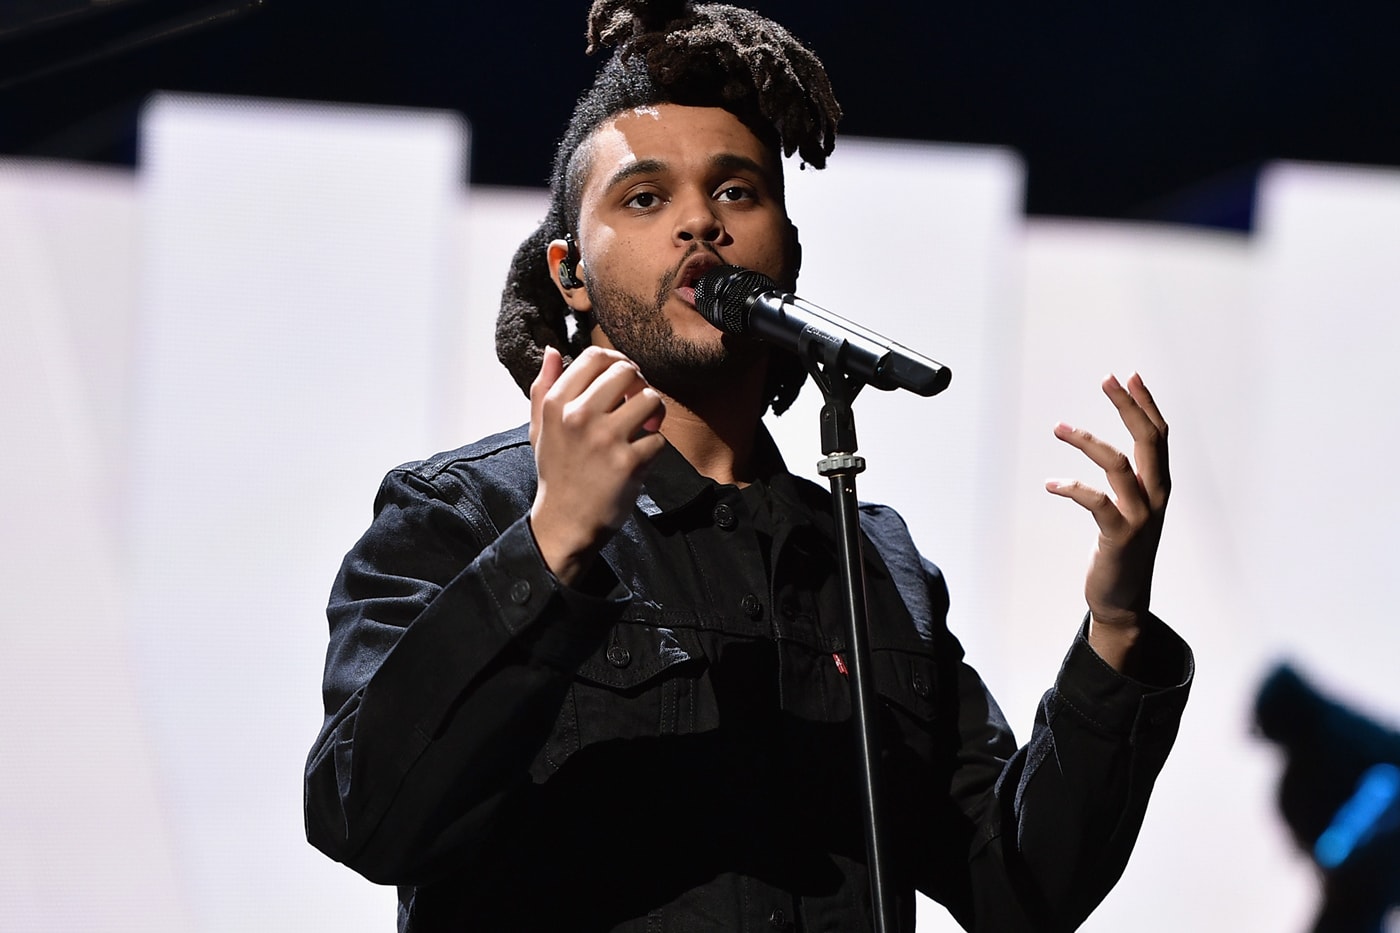 the-weeknd-releases-first-drop-of-his-2016-springsummer-fan-merch